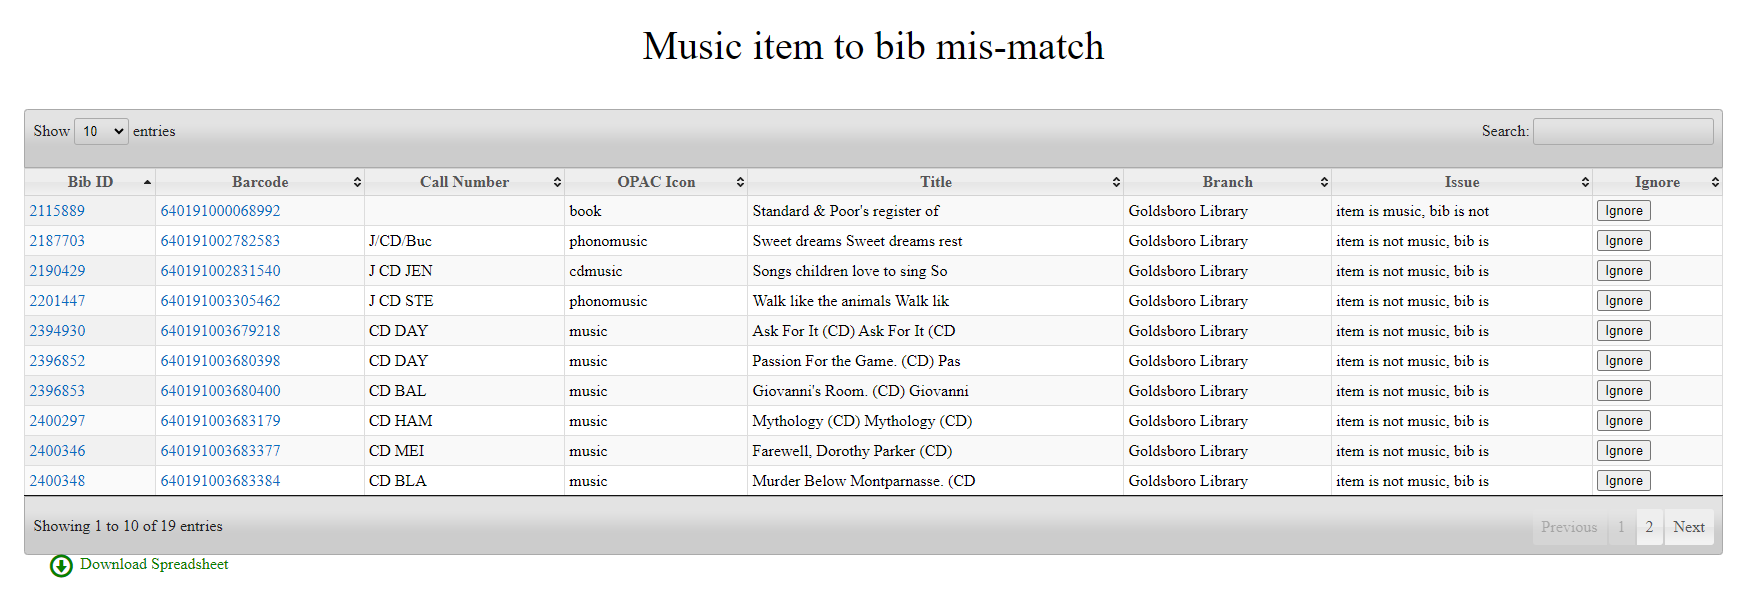 Example list of music item to bib mis-matches